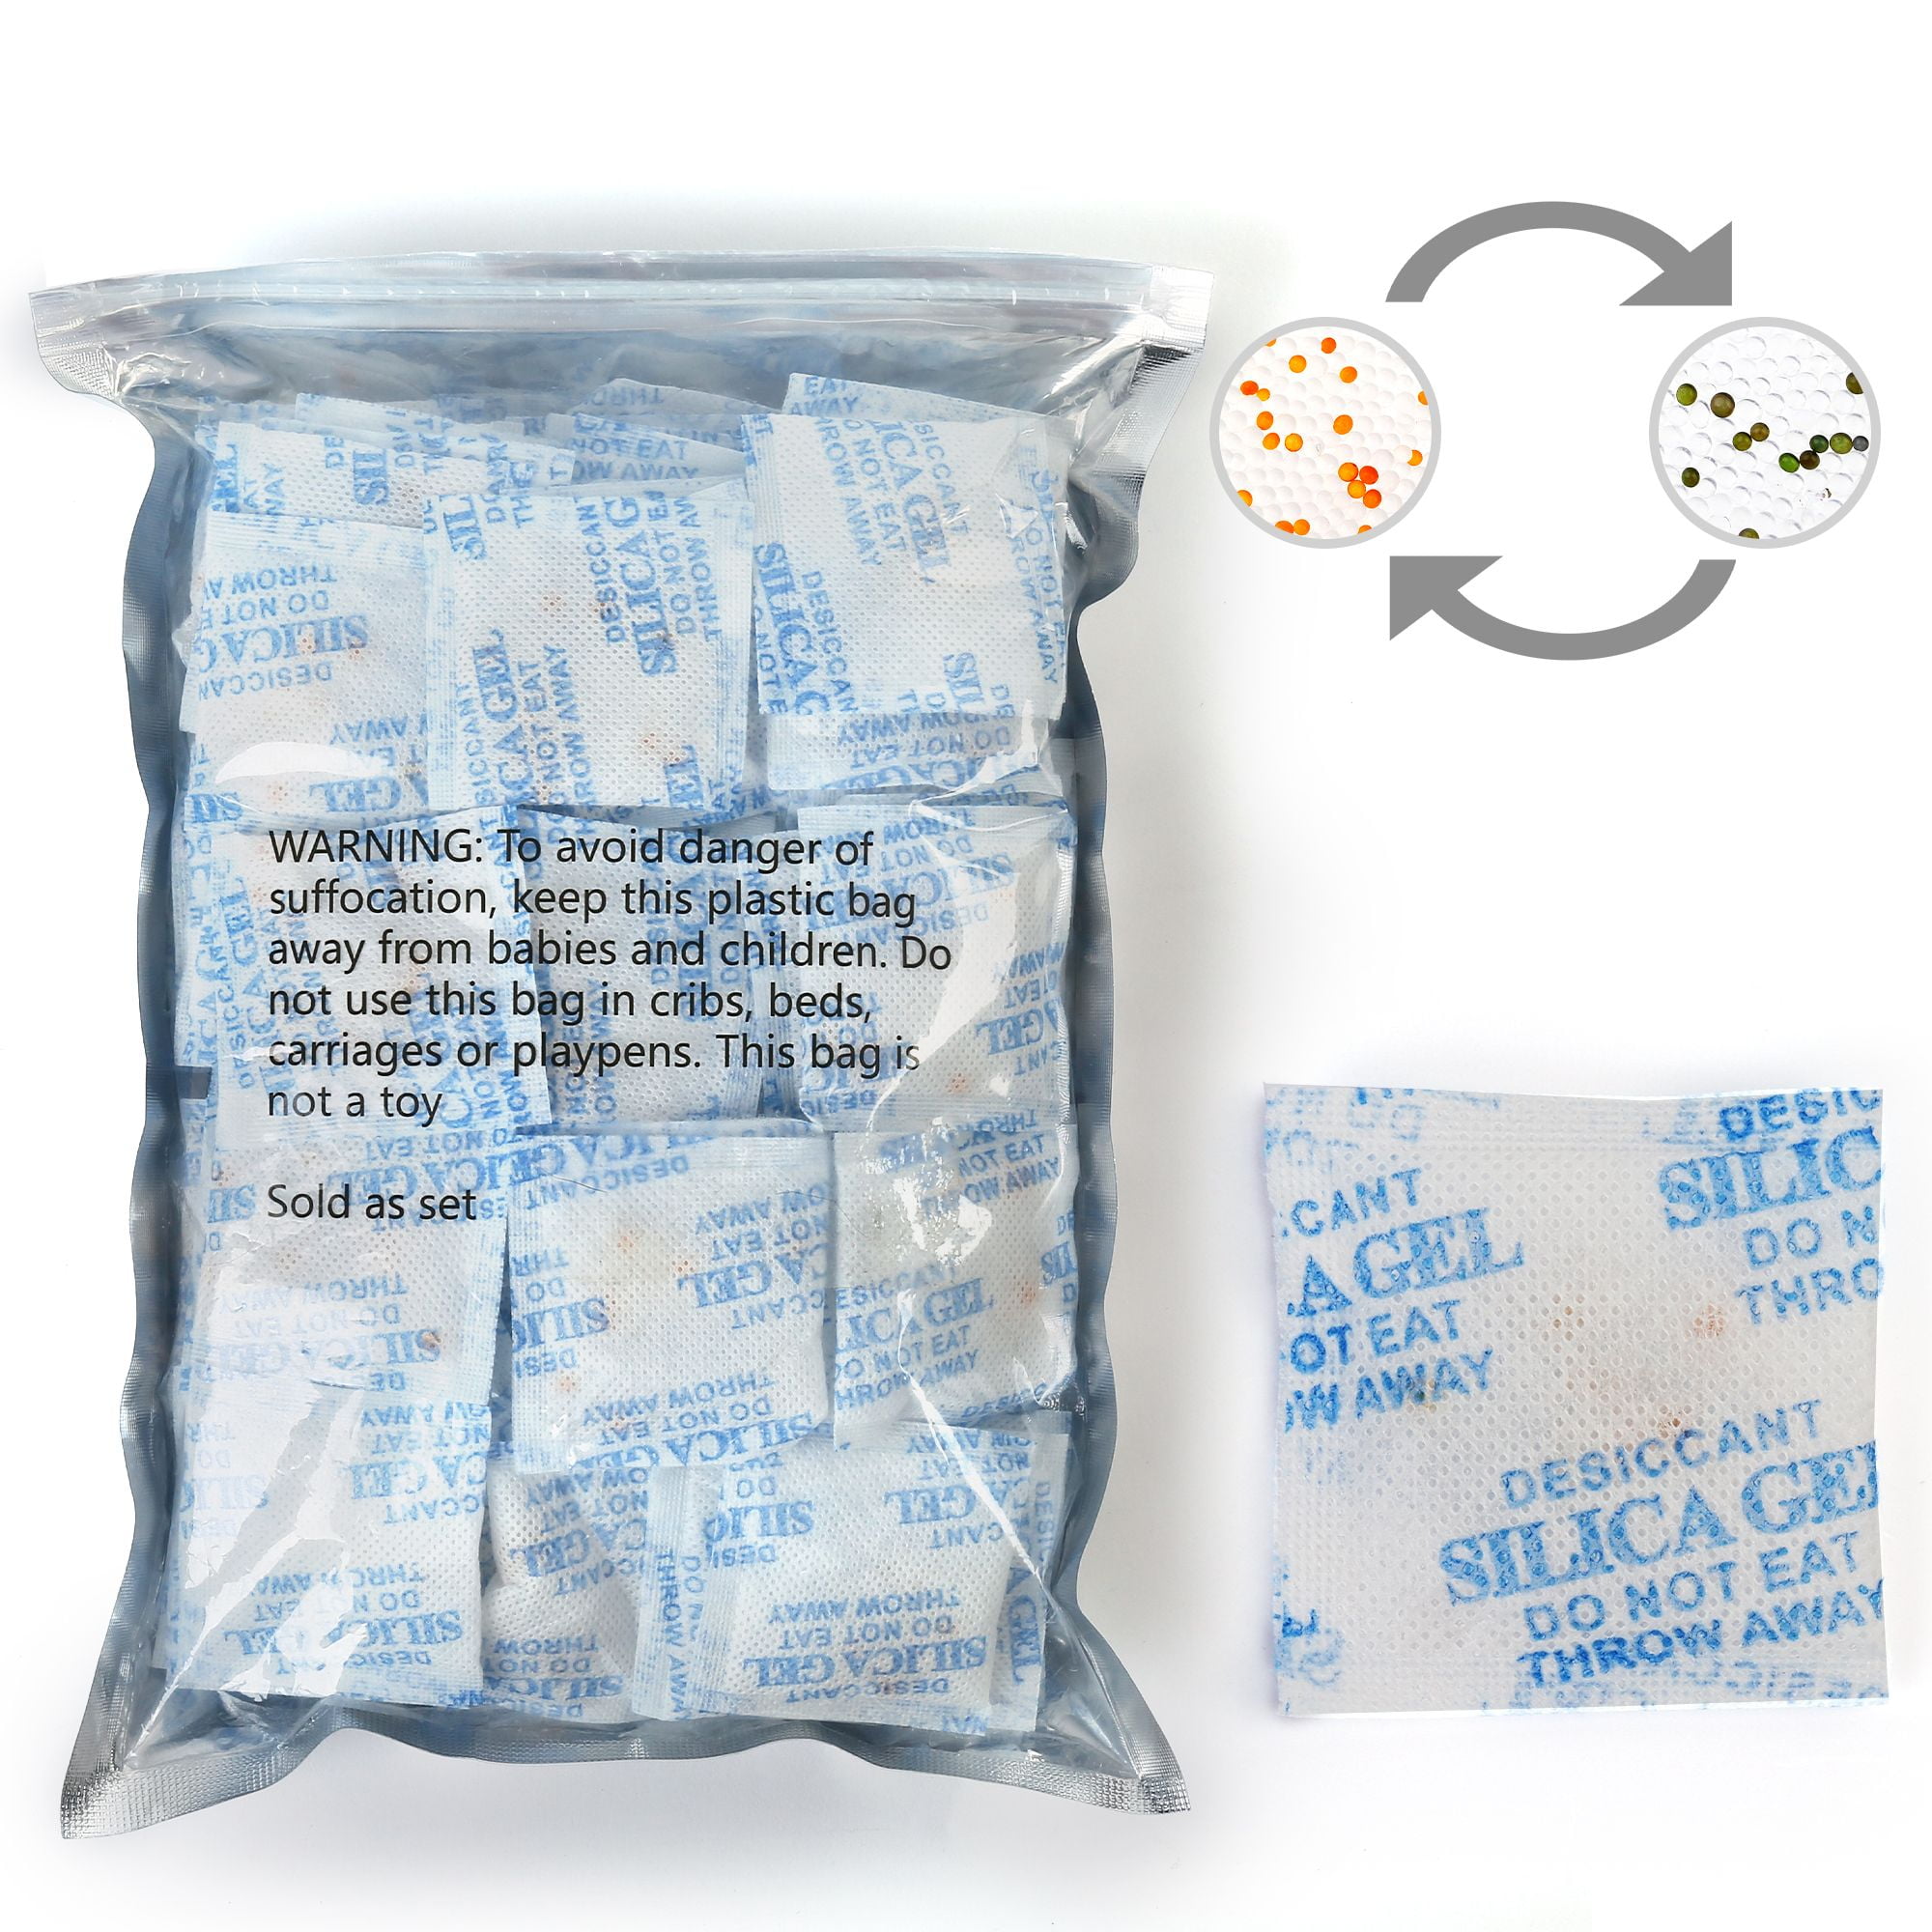 9 Ways To Use Silica Gel Desiccants – Royco Packaging